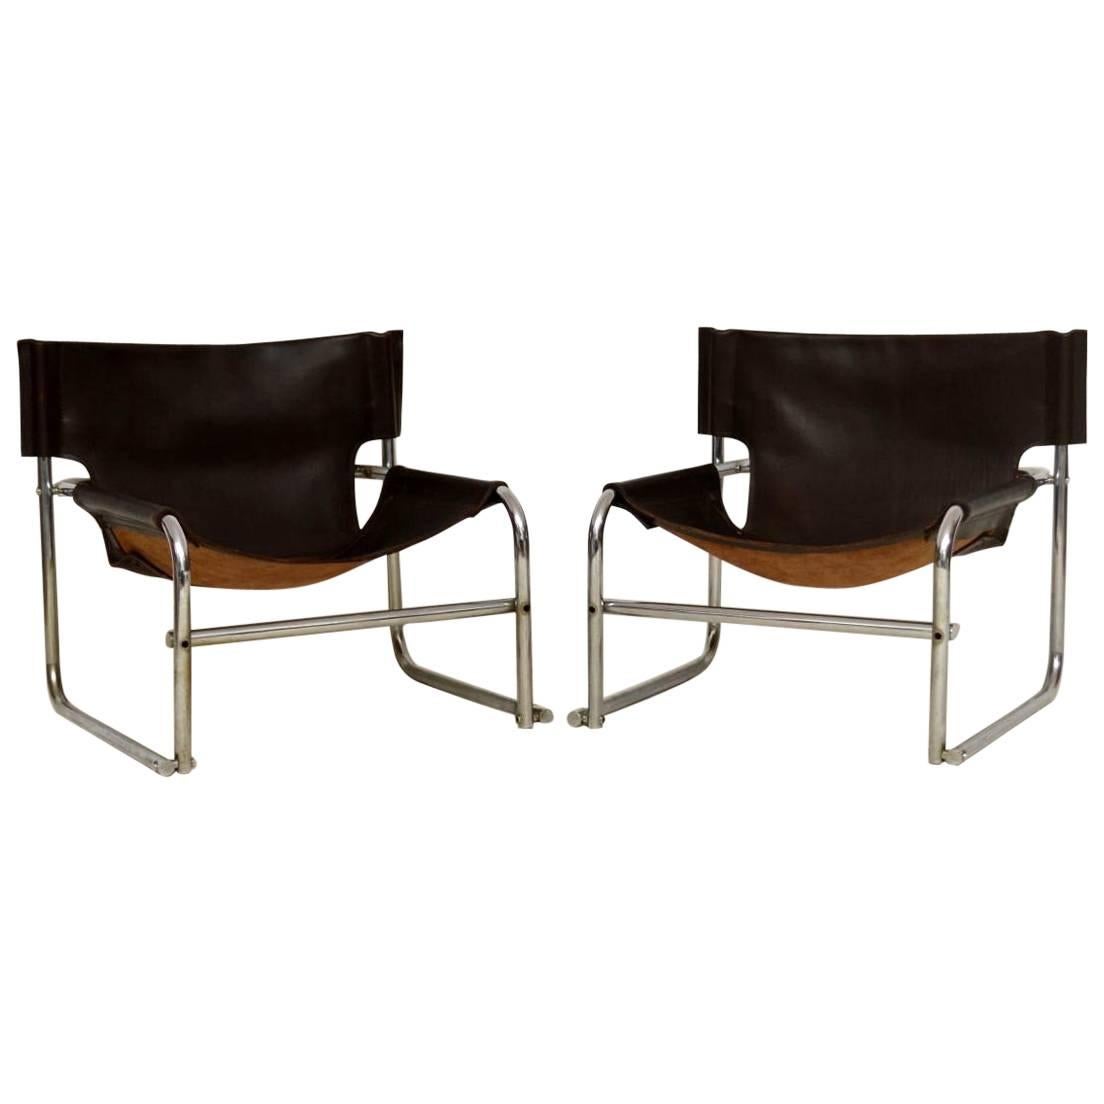 1960s Steel and Leather Pair of Armchairs, T1 by Rodney Kinsman for OMK